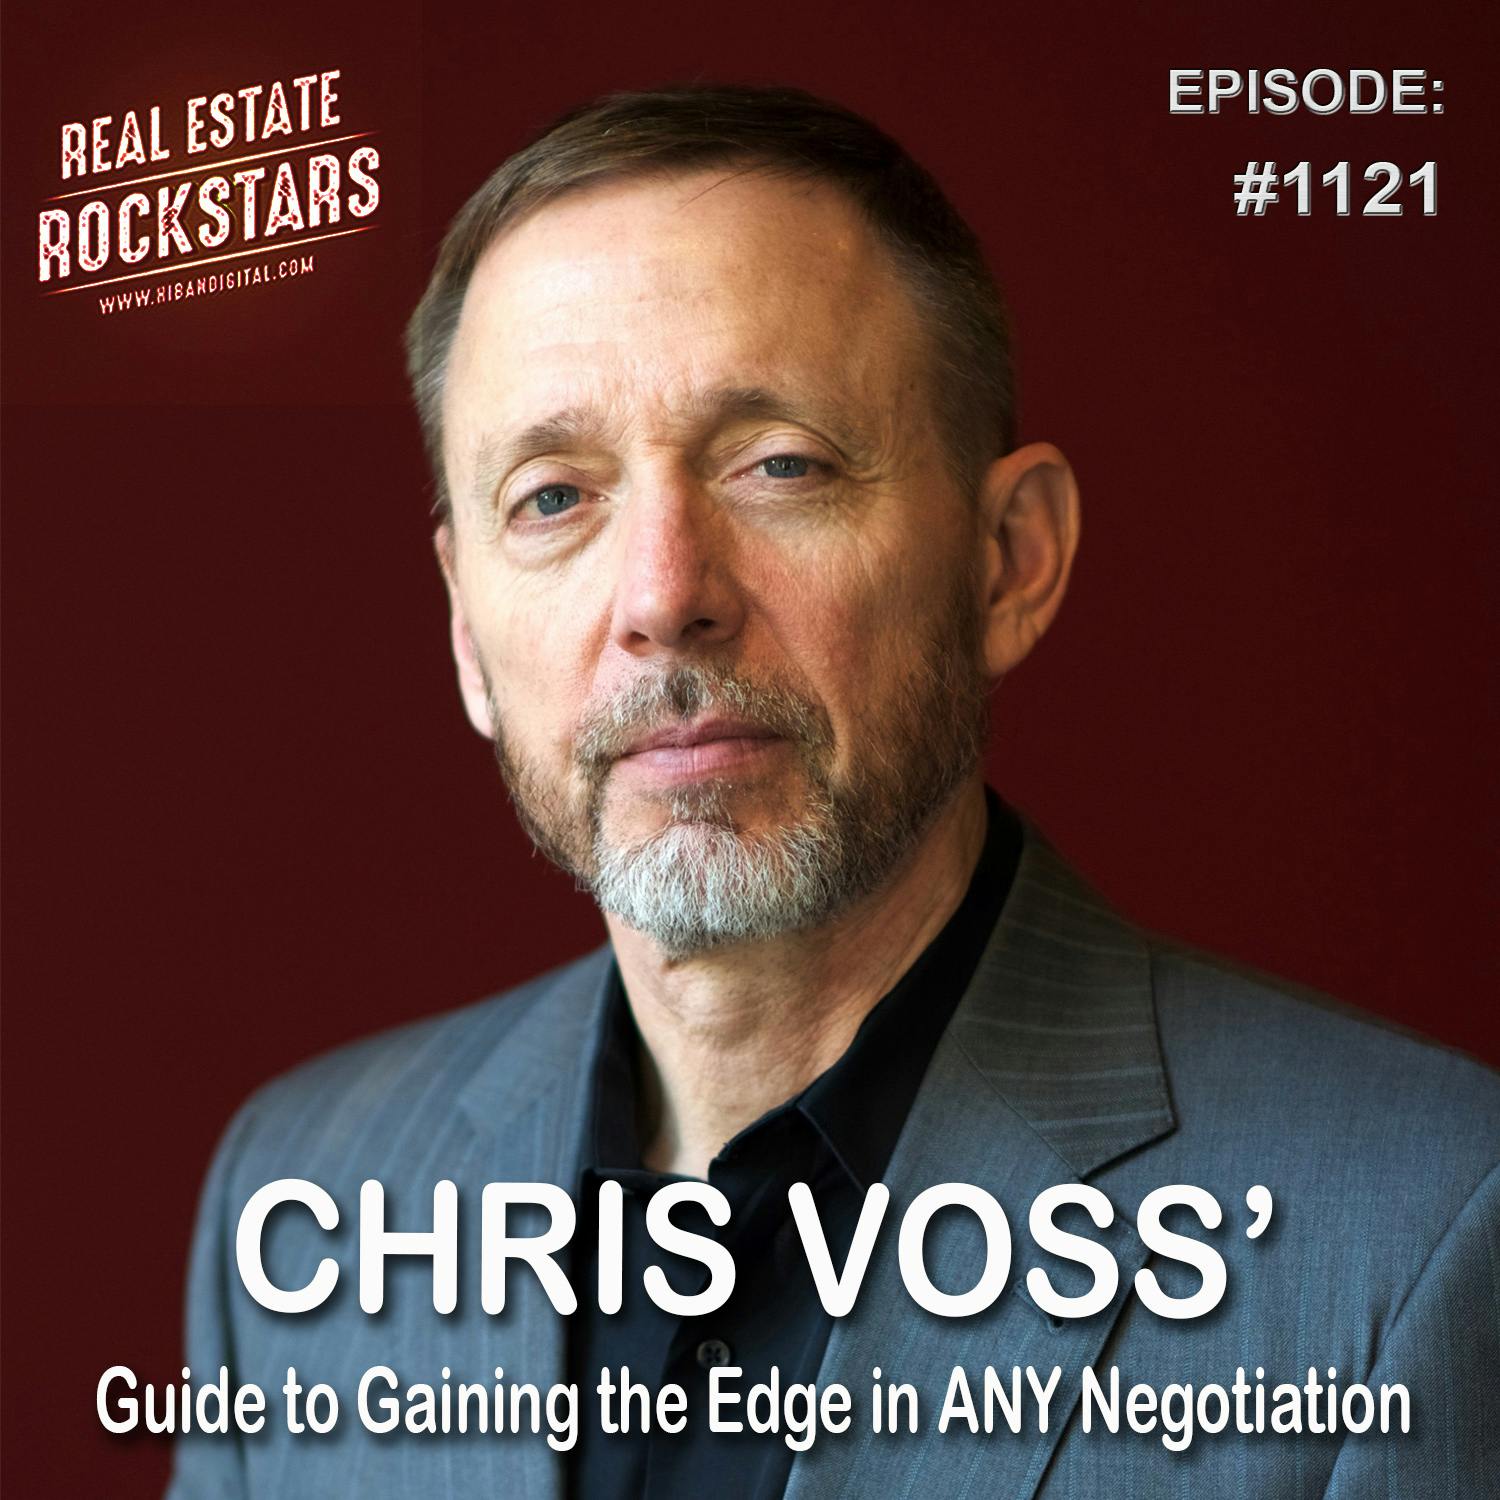 1121: Chris Voss’ Guide to Gaining the Edge in ANY Negotiation